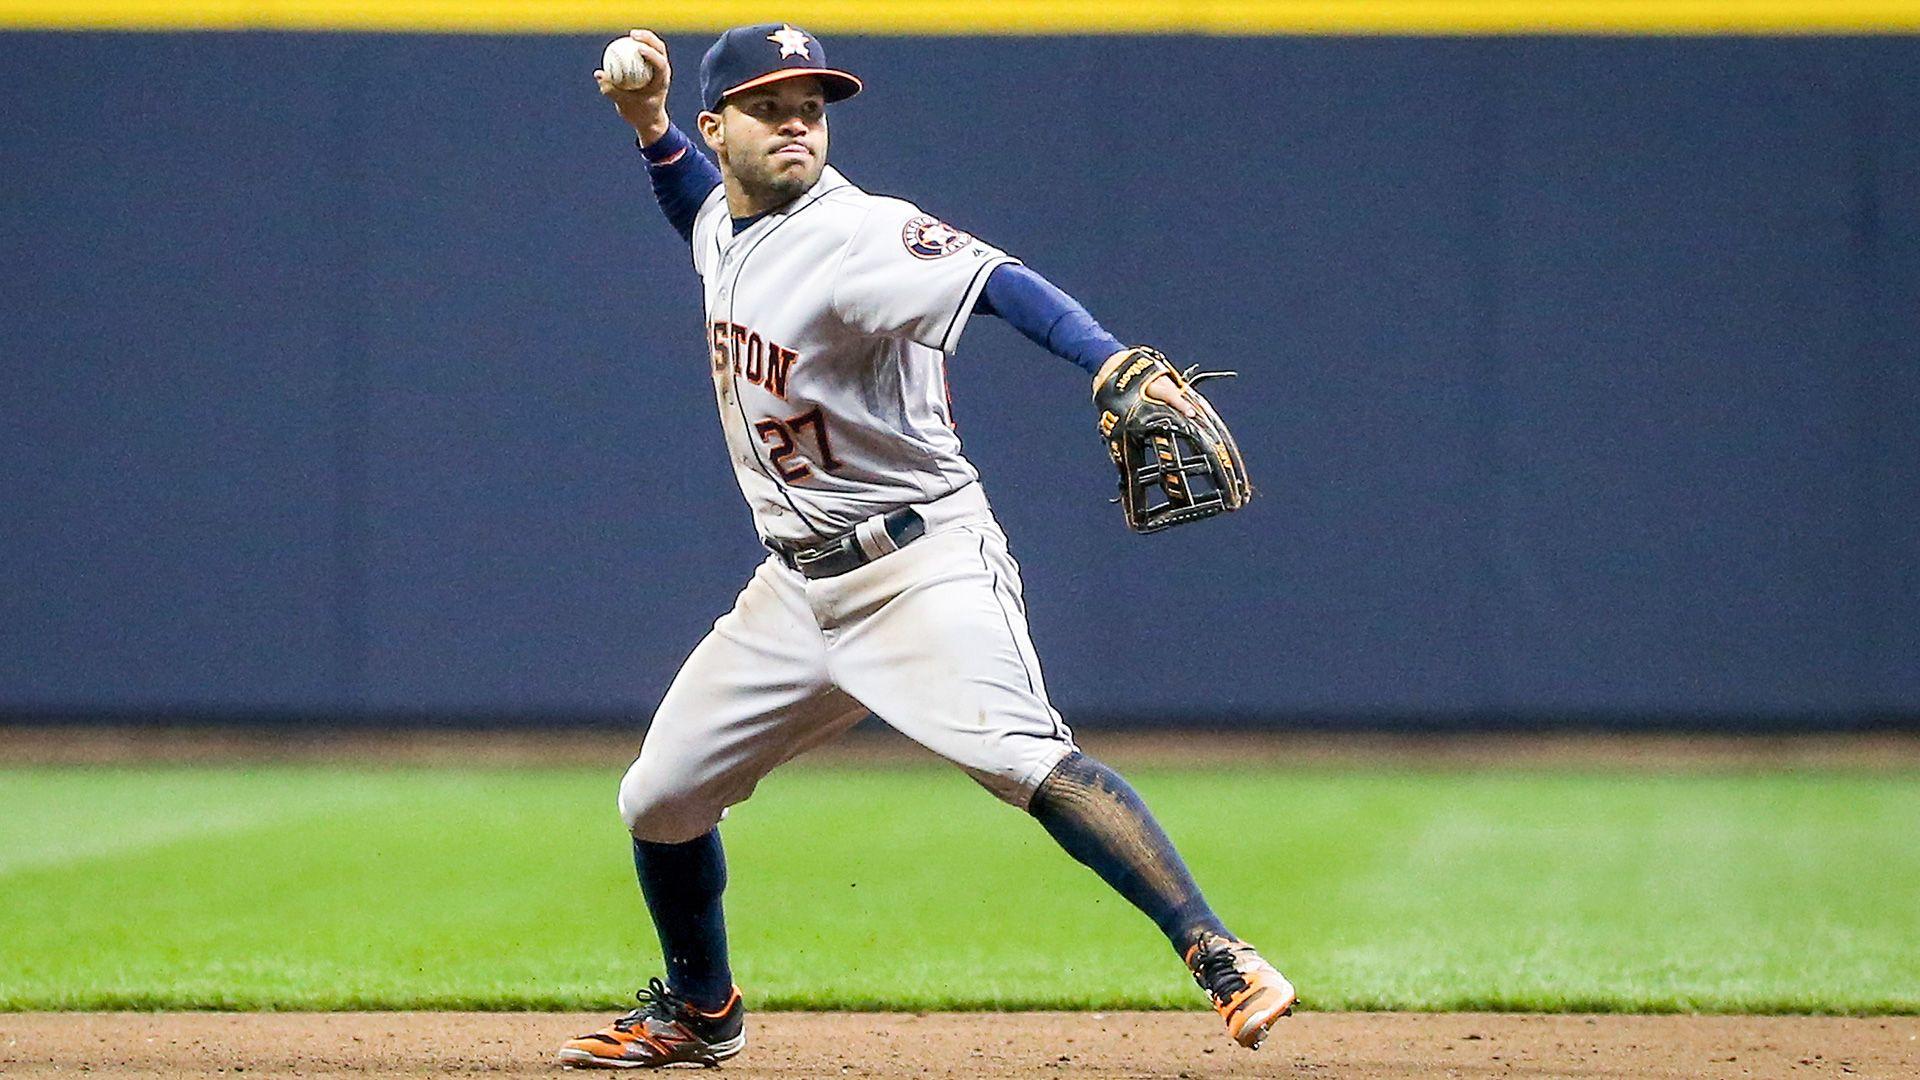 Astros' Jose Altuve voted Sporting News MLB Player of the Year